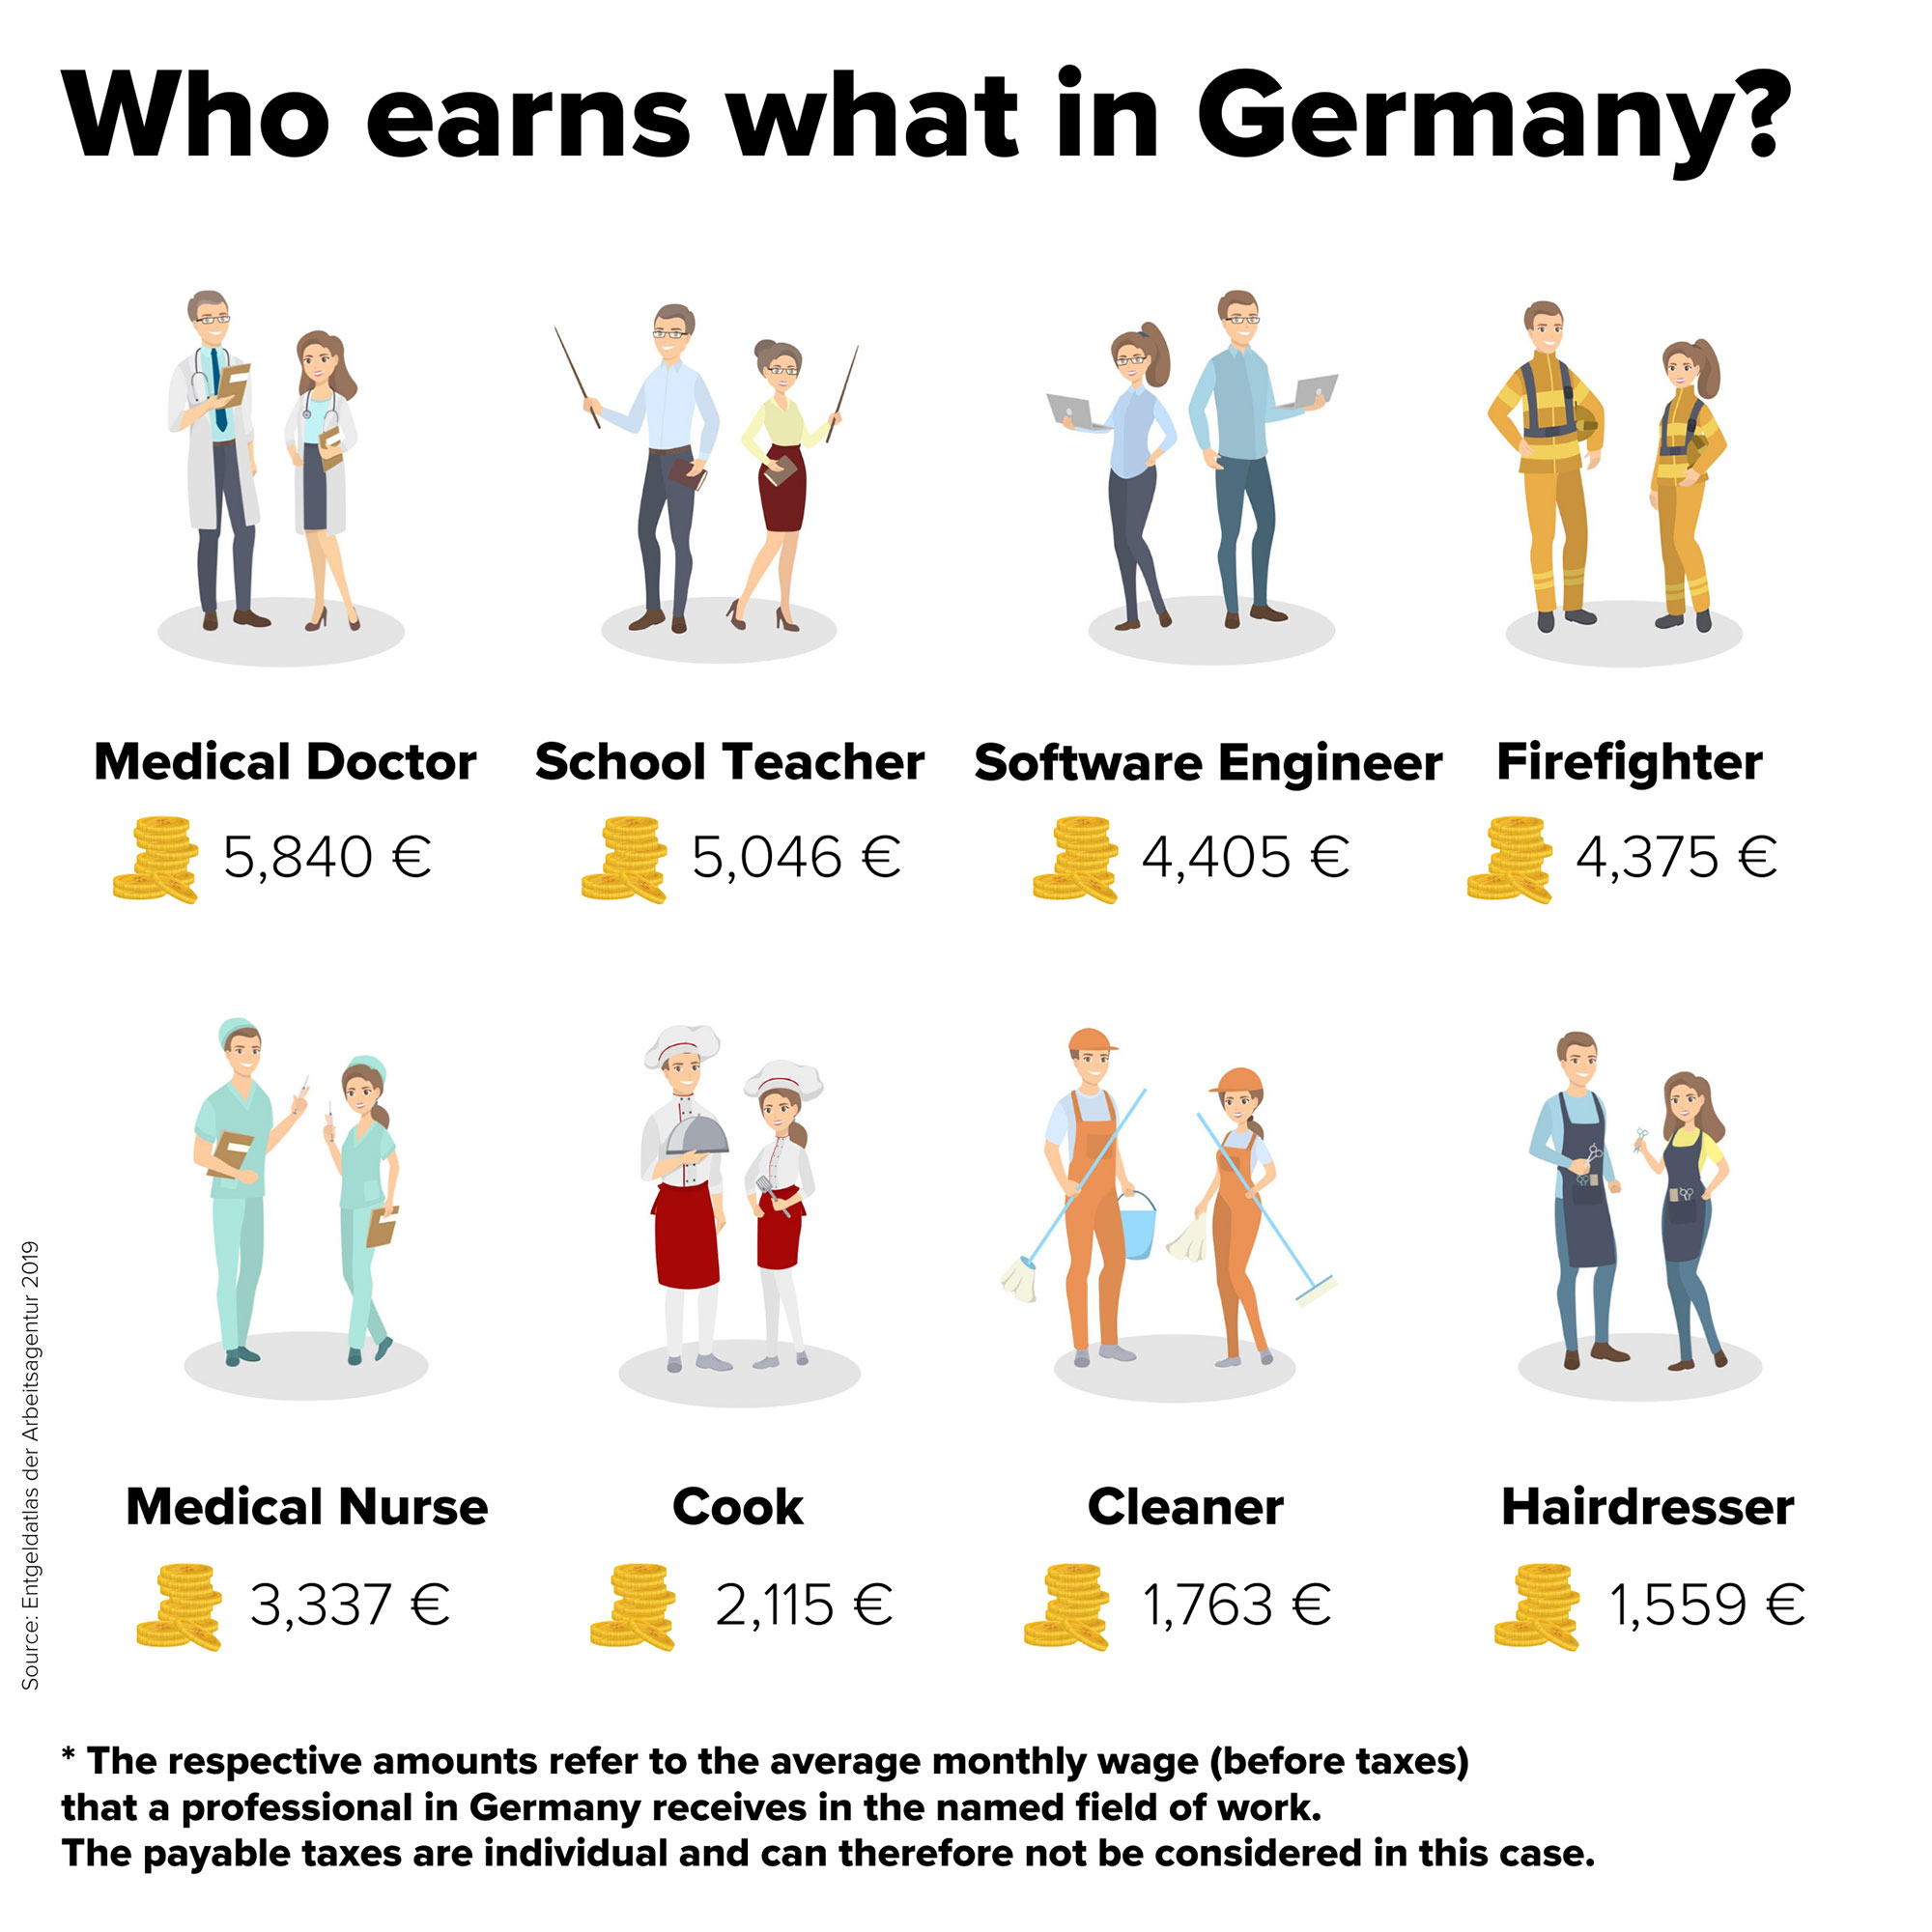 Who earns what in Germany?